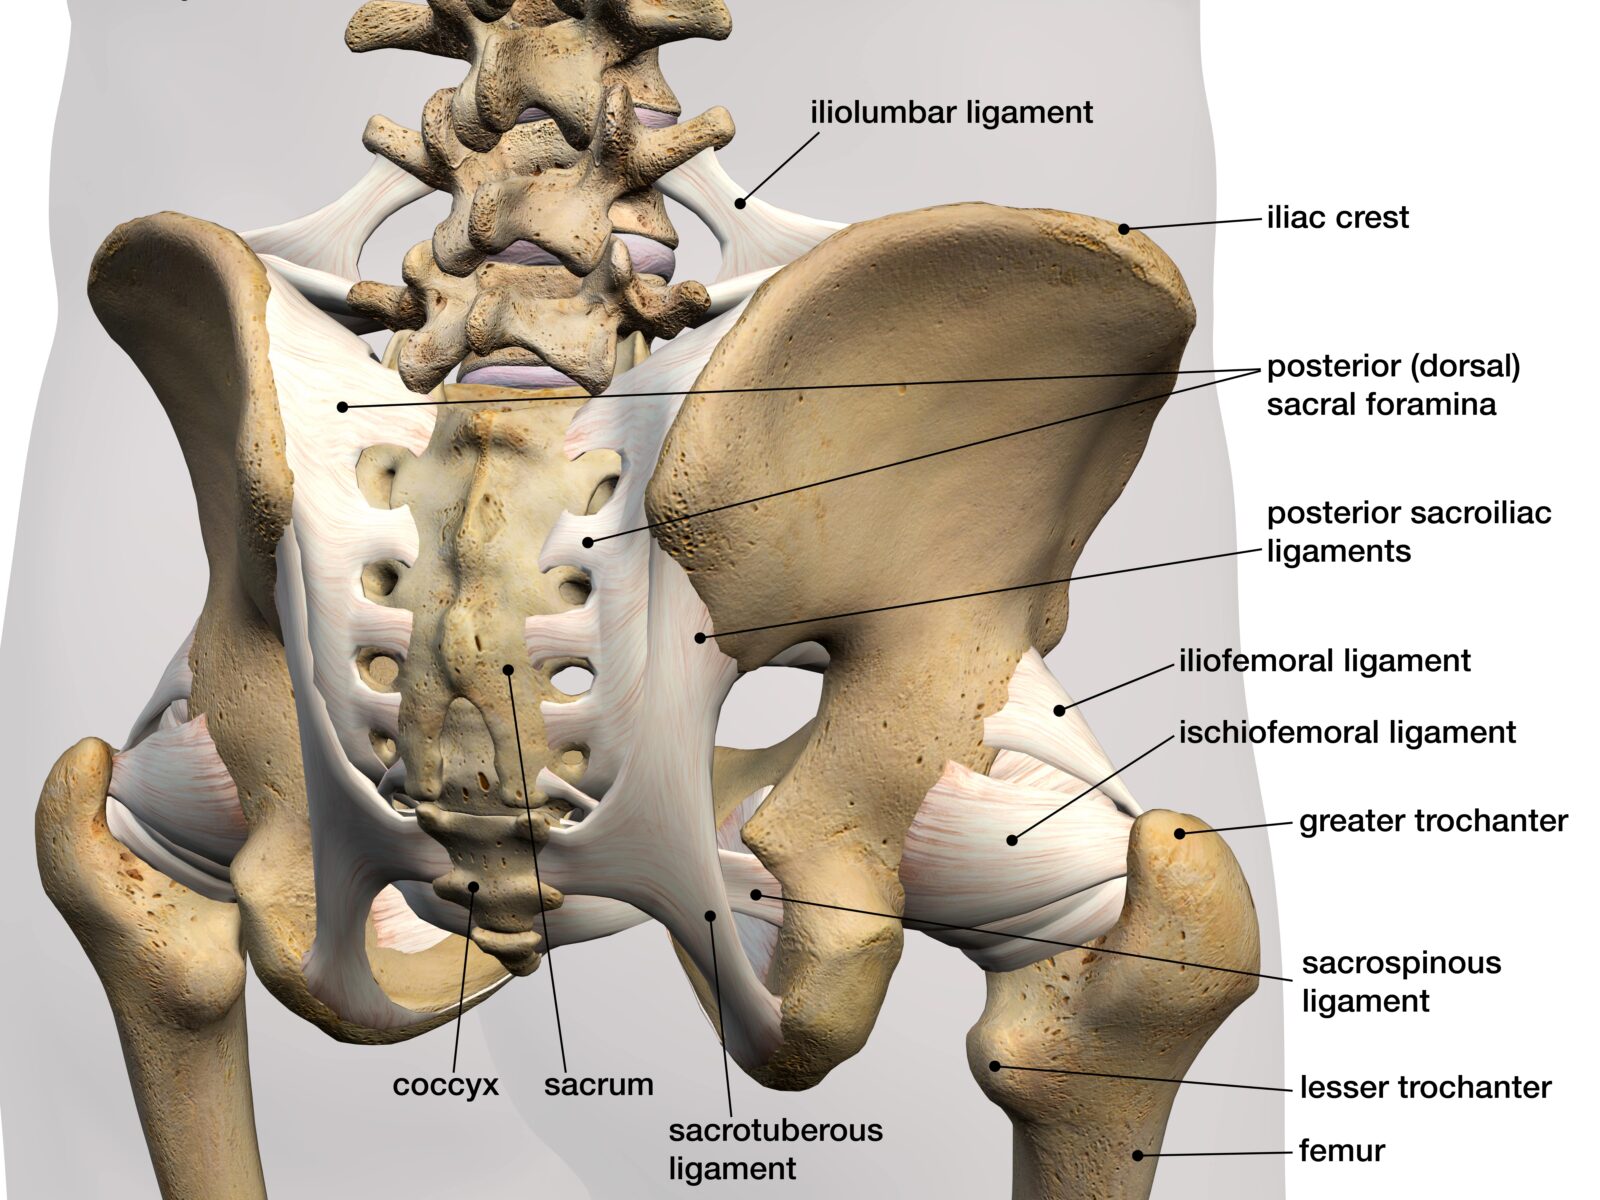 ligaments attached to tailbone and pelvic bones